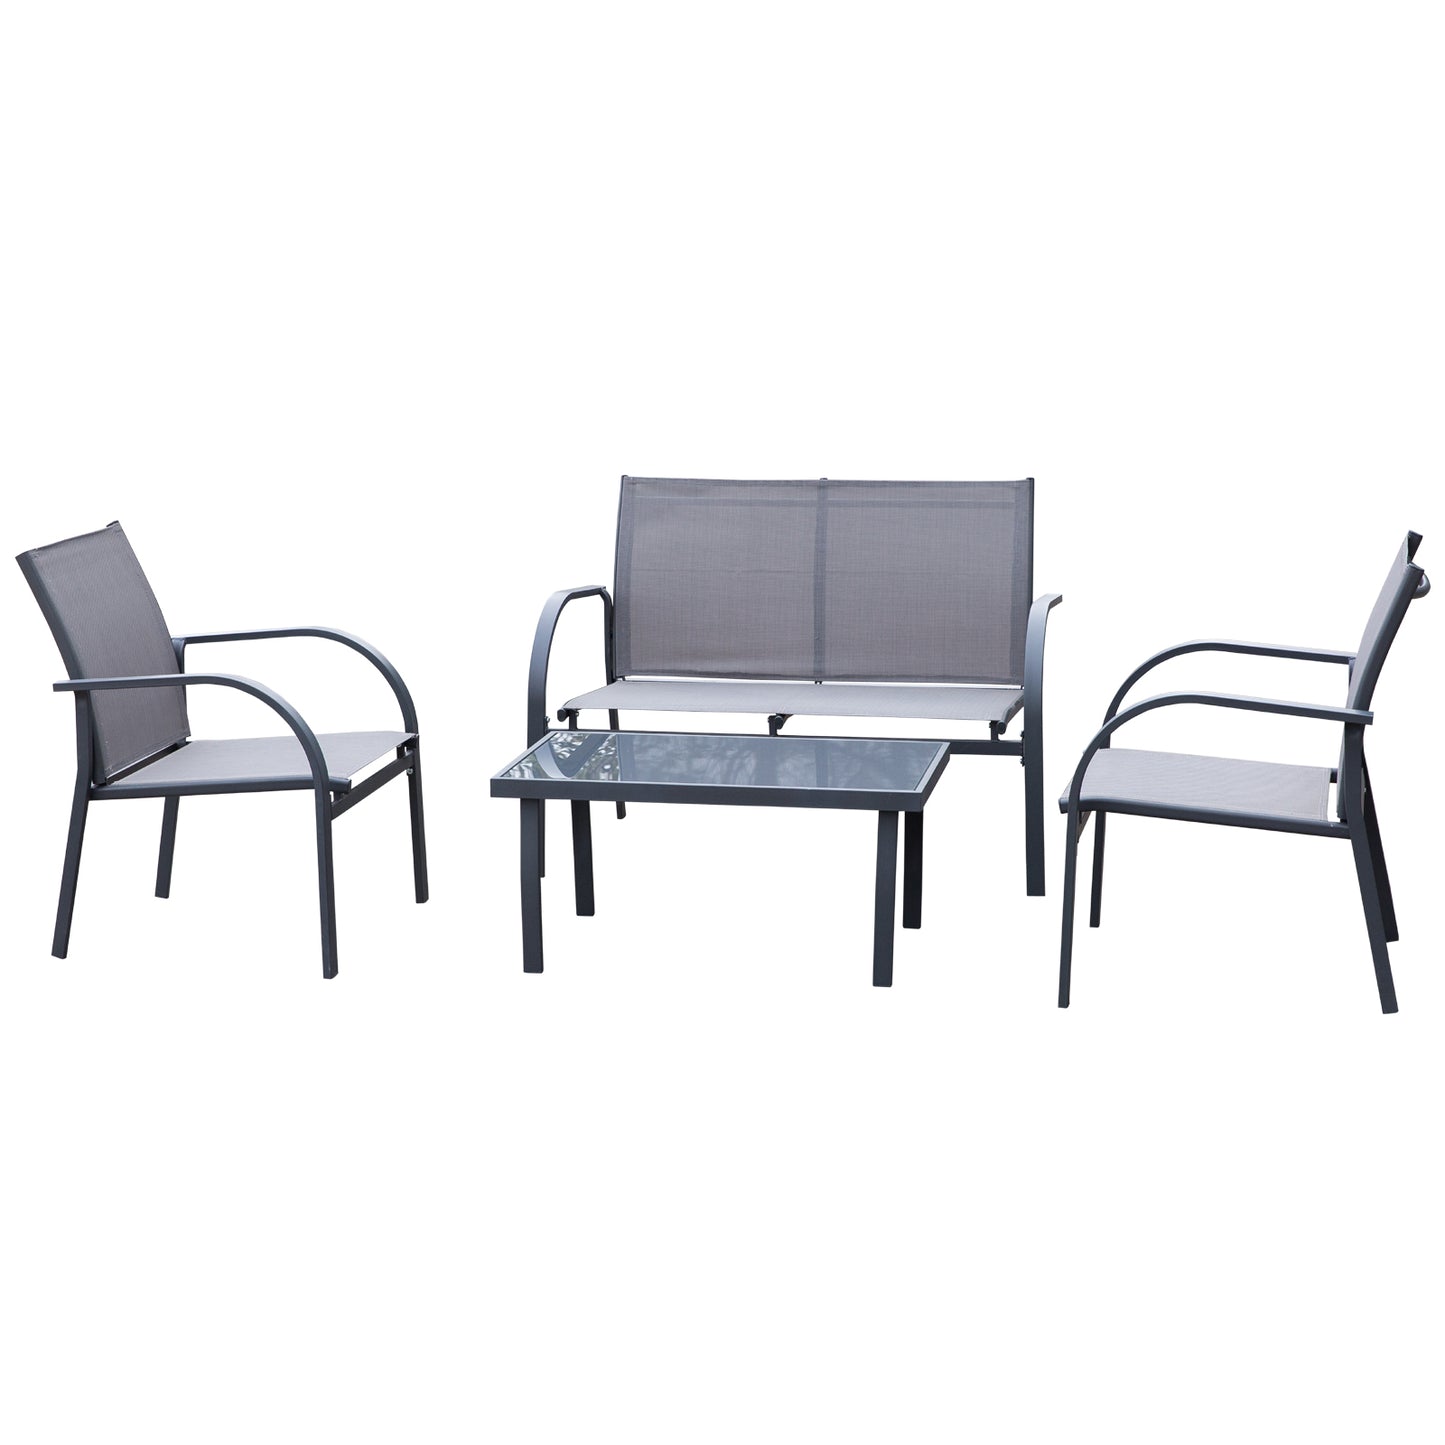 Outsunny 4 Pcs Curved Steel Outdoor Dining Set w/ Loveseat 2 Chairs Glass Top Table Grey